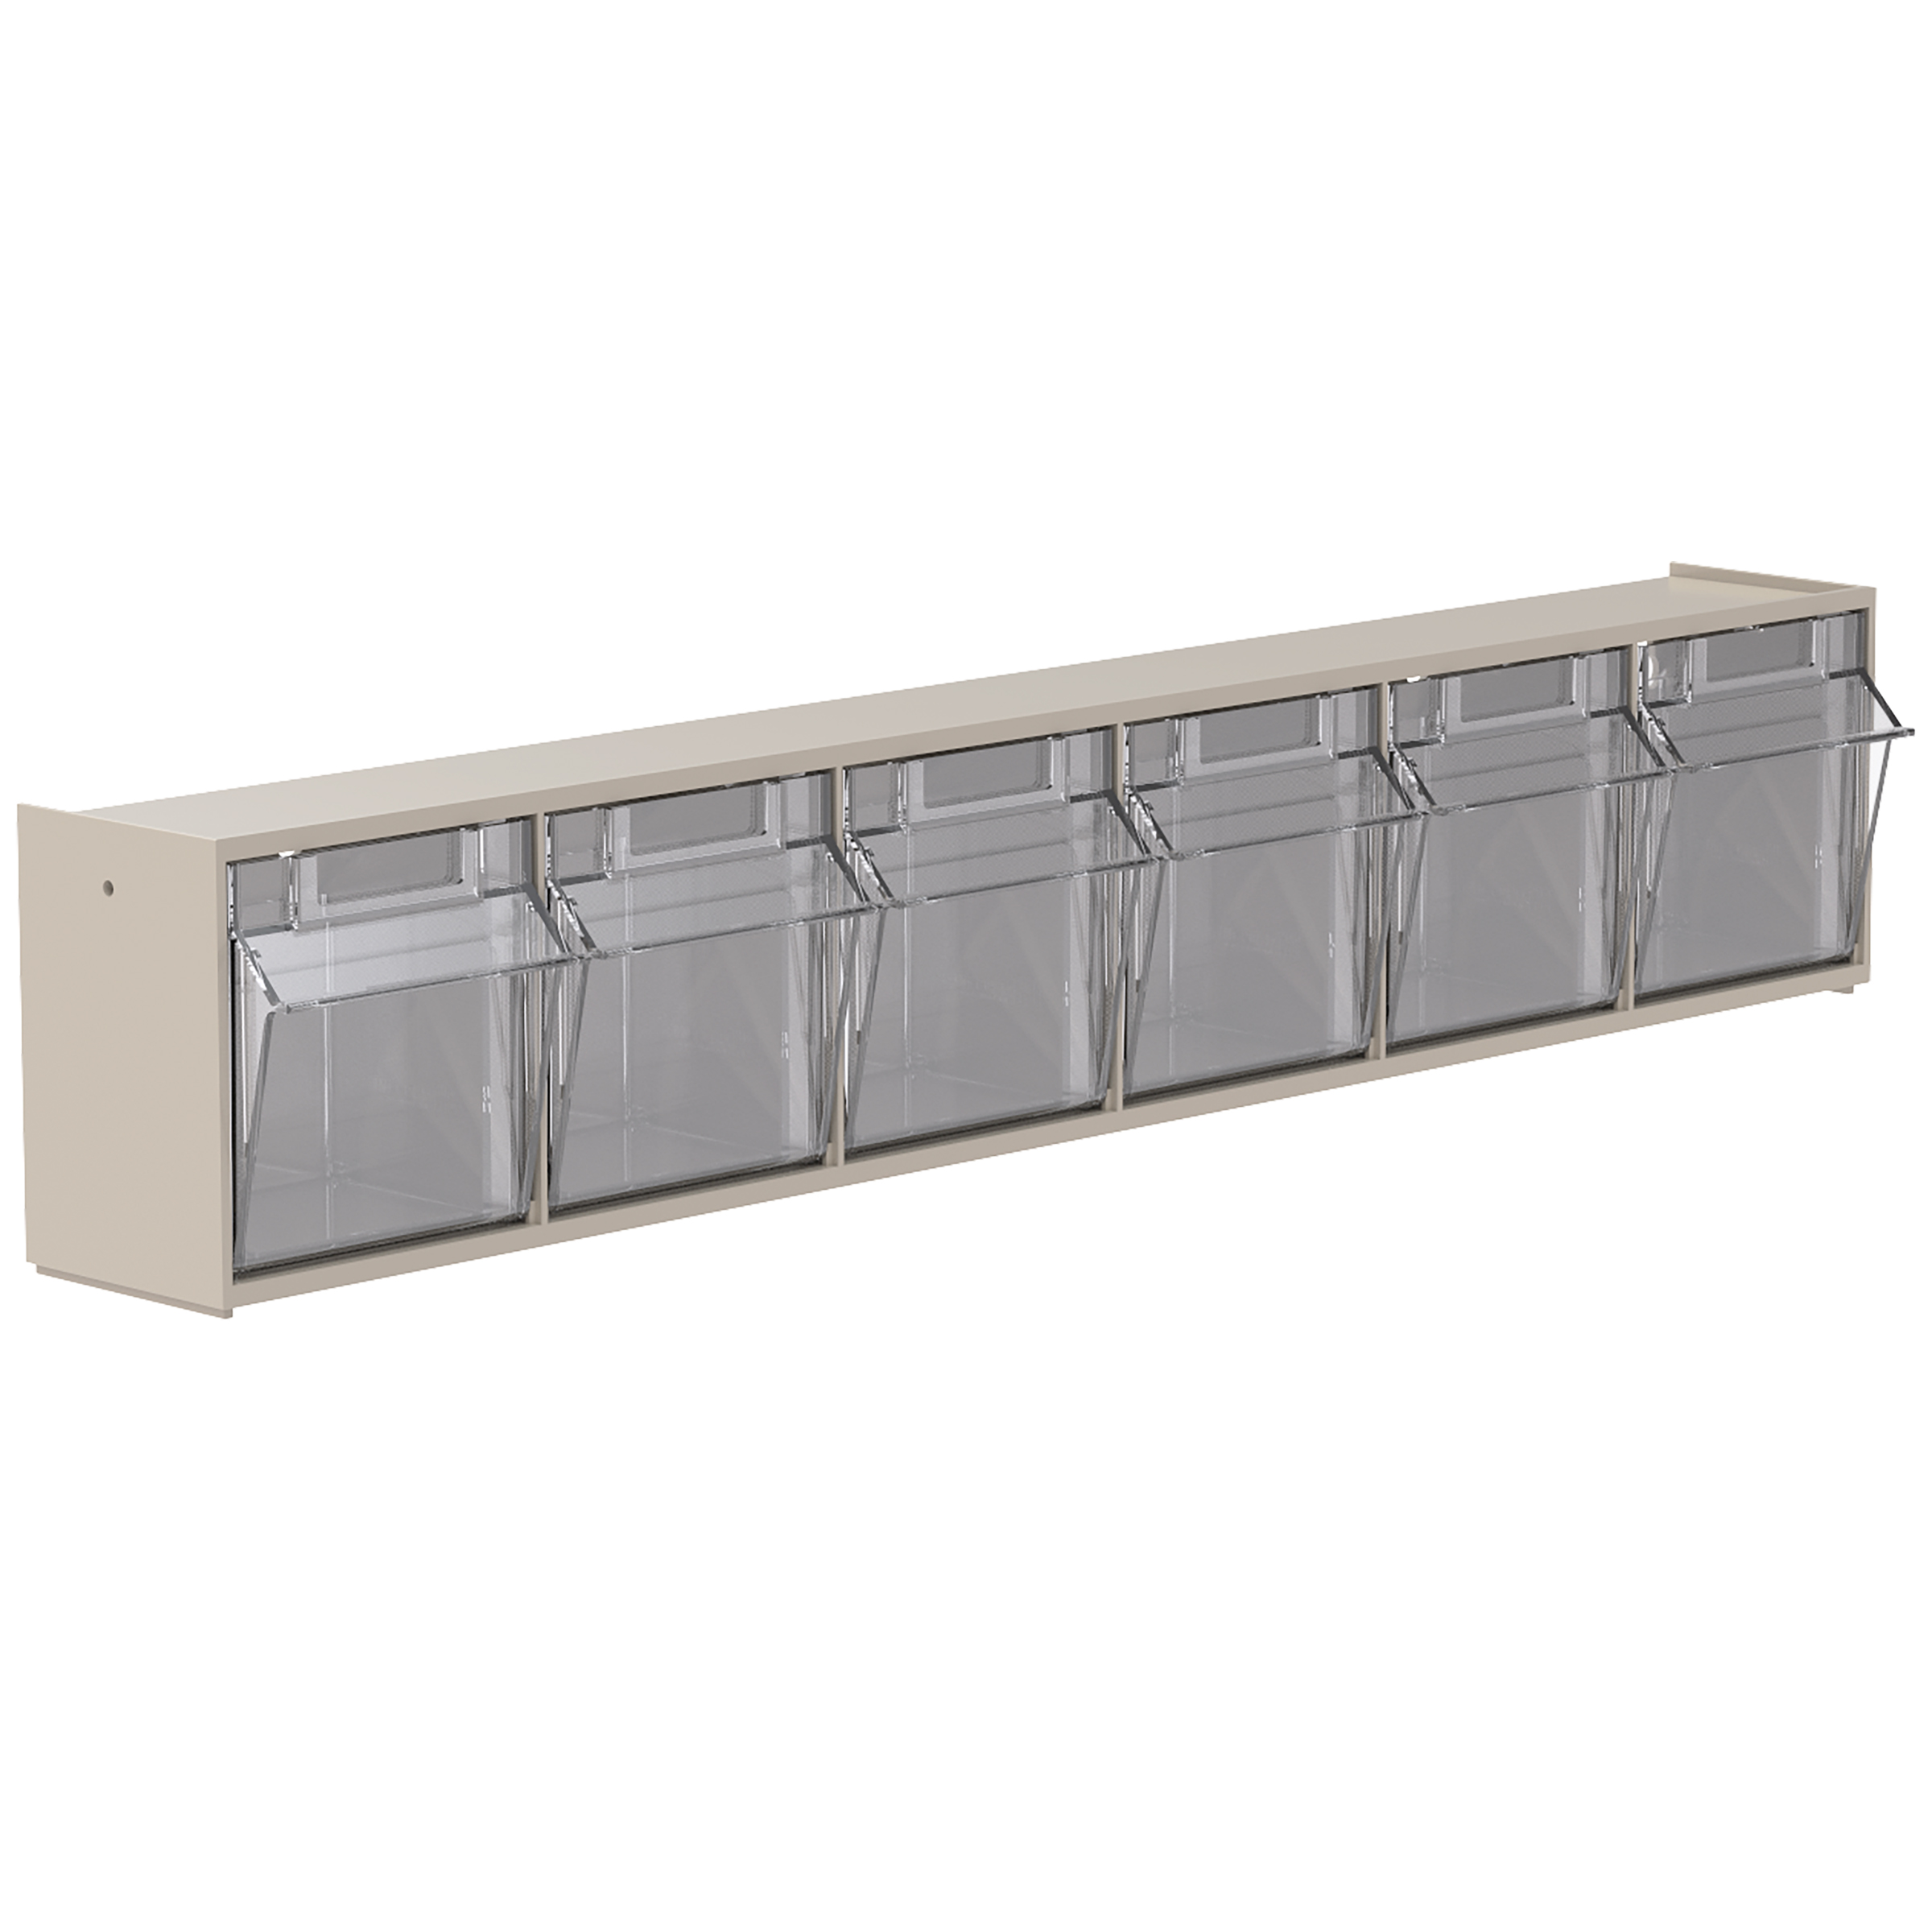 Akro-Mils TiltView Horizontal Plastic Organizer Storage System Cabinet with 6 Tip Out Bins, (23-5/8-Inch Wide x 4-1/2-Inch High x 3-3/4-Inch Deep), Stone 06706 - image 1 of 7